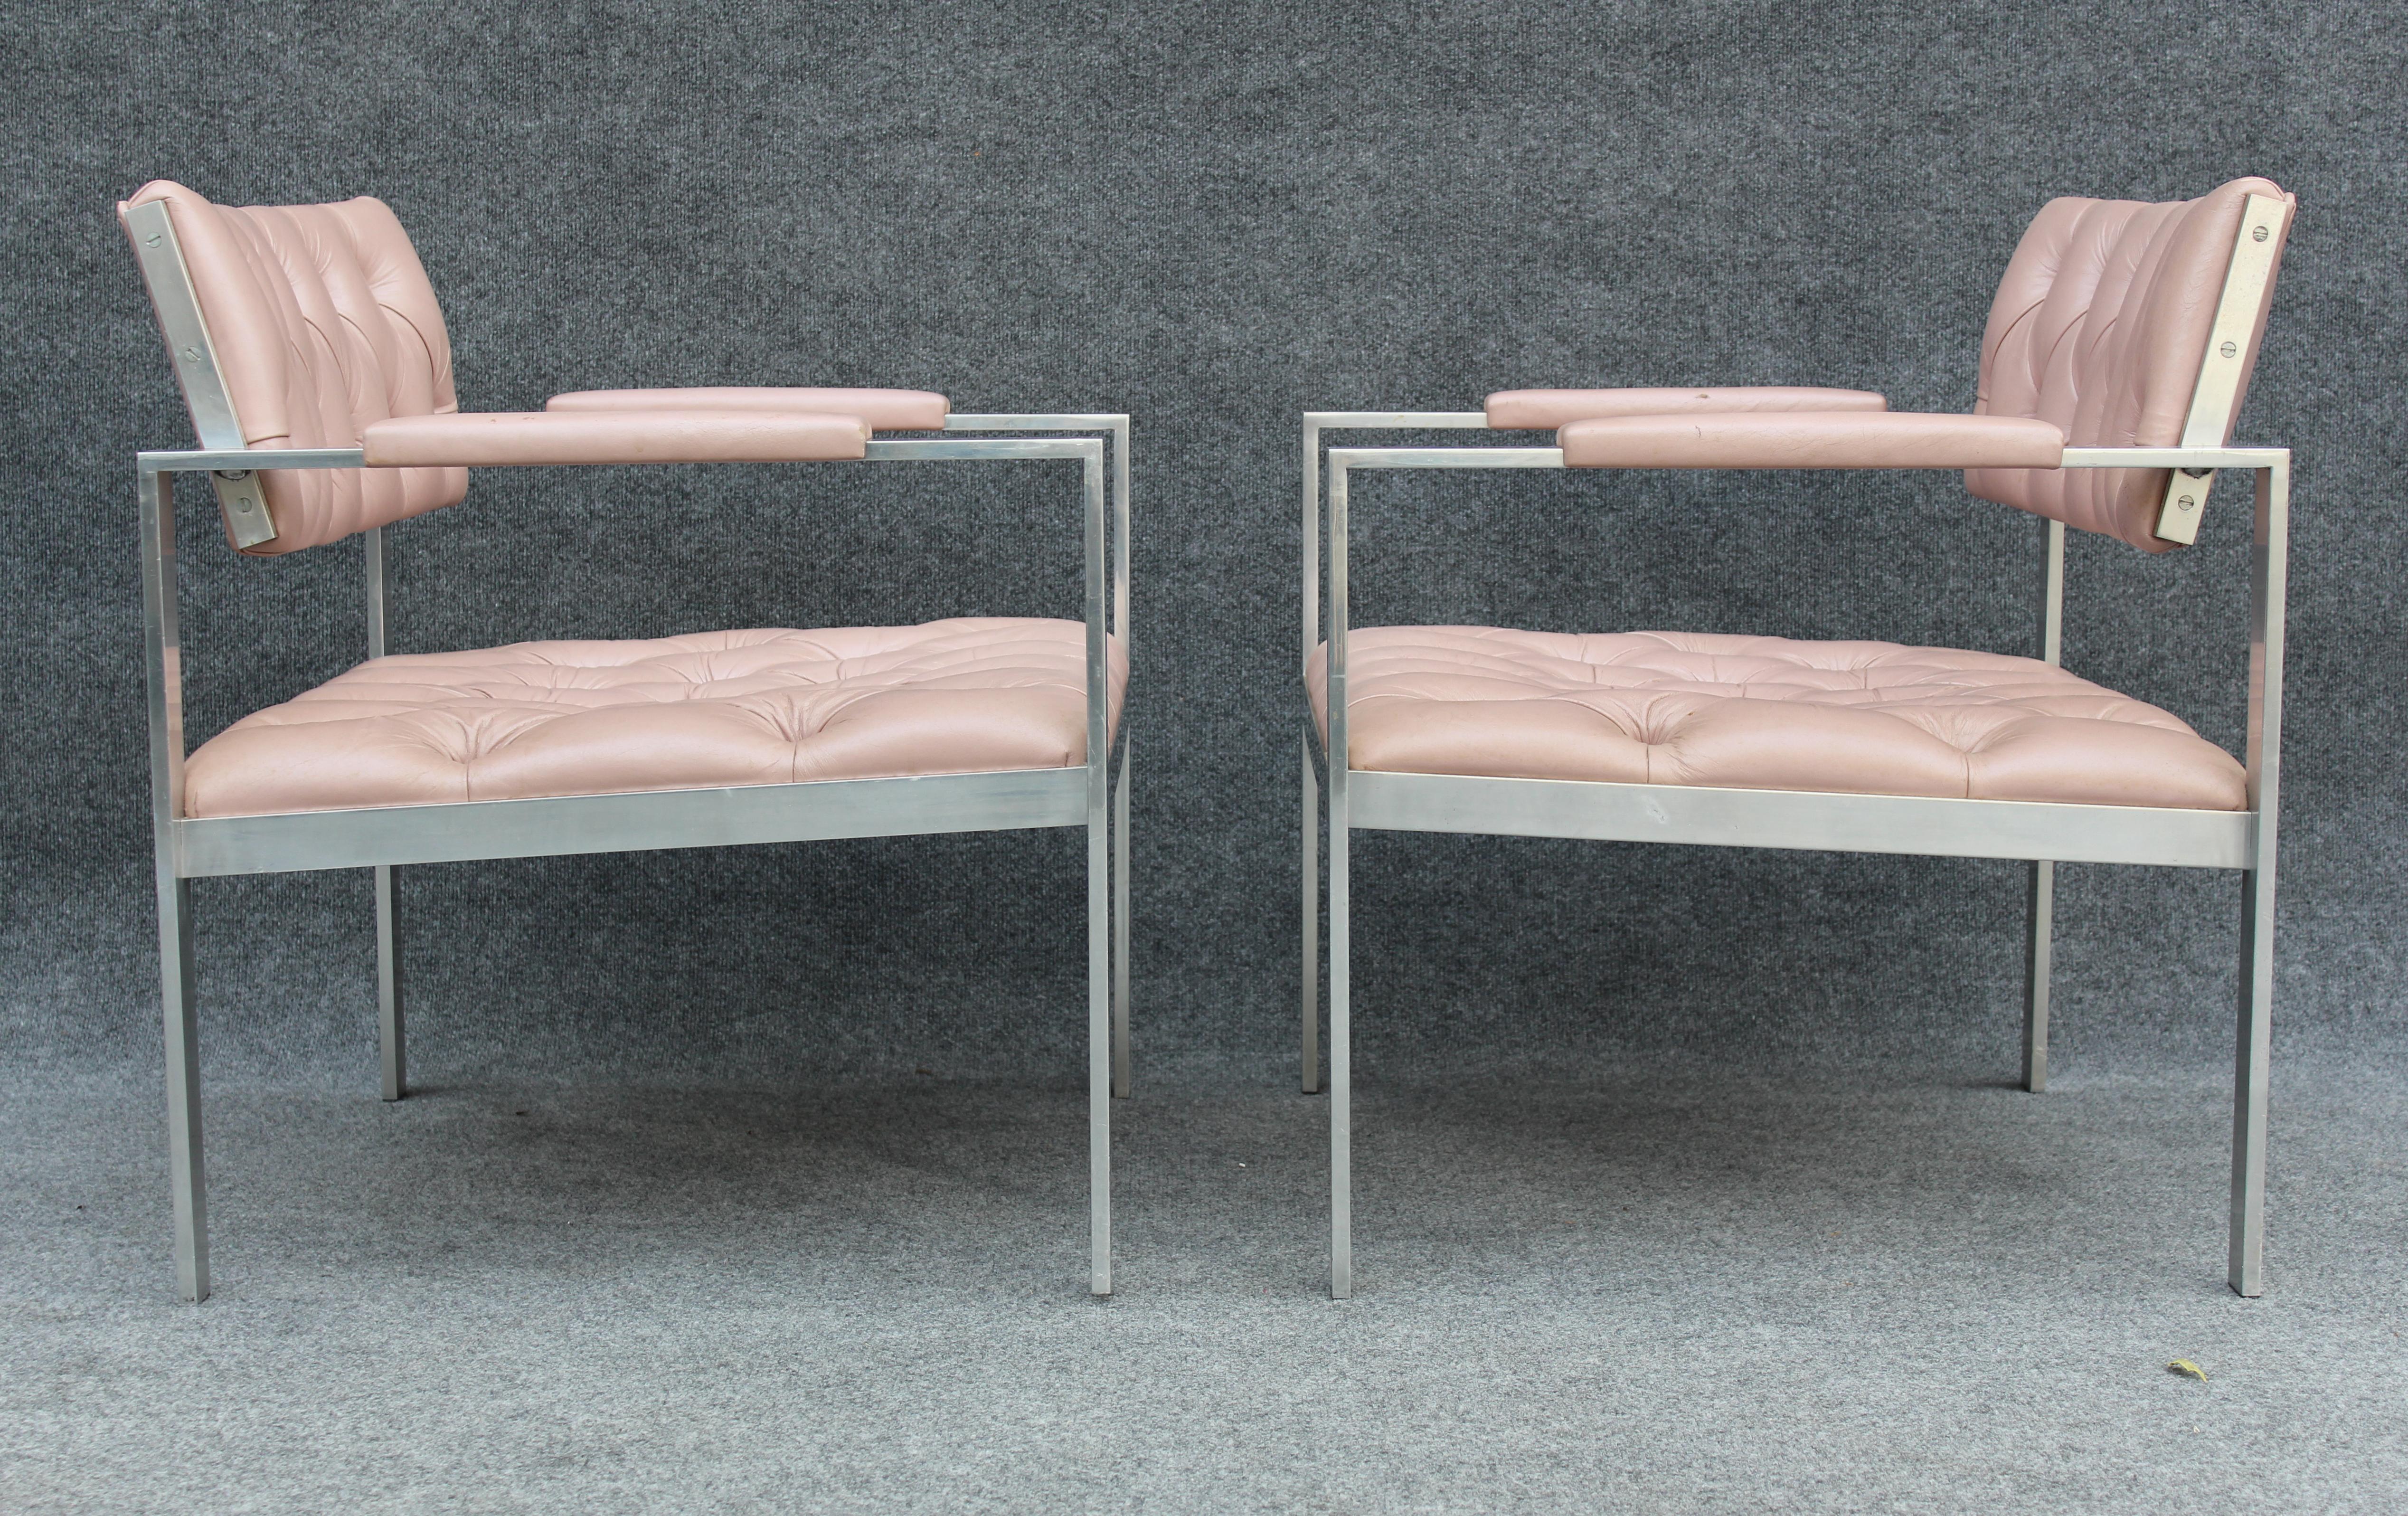 Pair of Rare Harvey Probber Polished Aluminum & Pink Leather Lounge Chairs 1970s For Sale 4